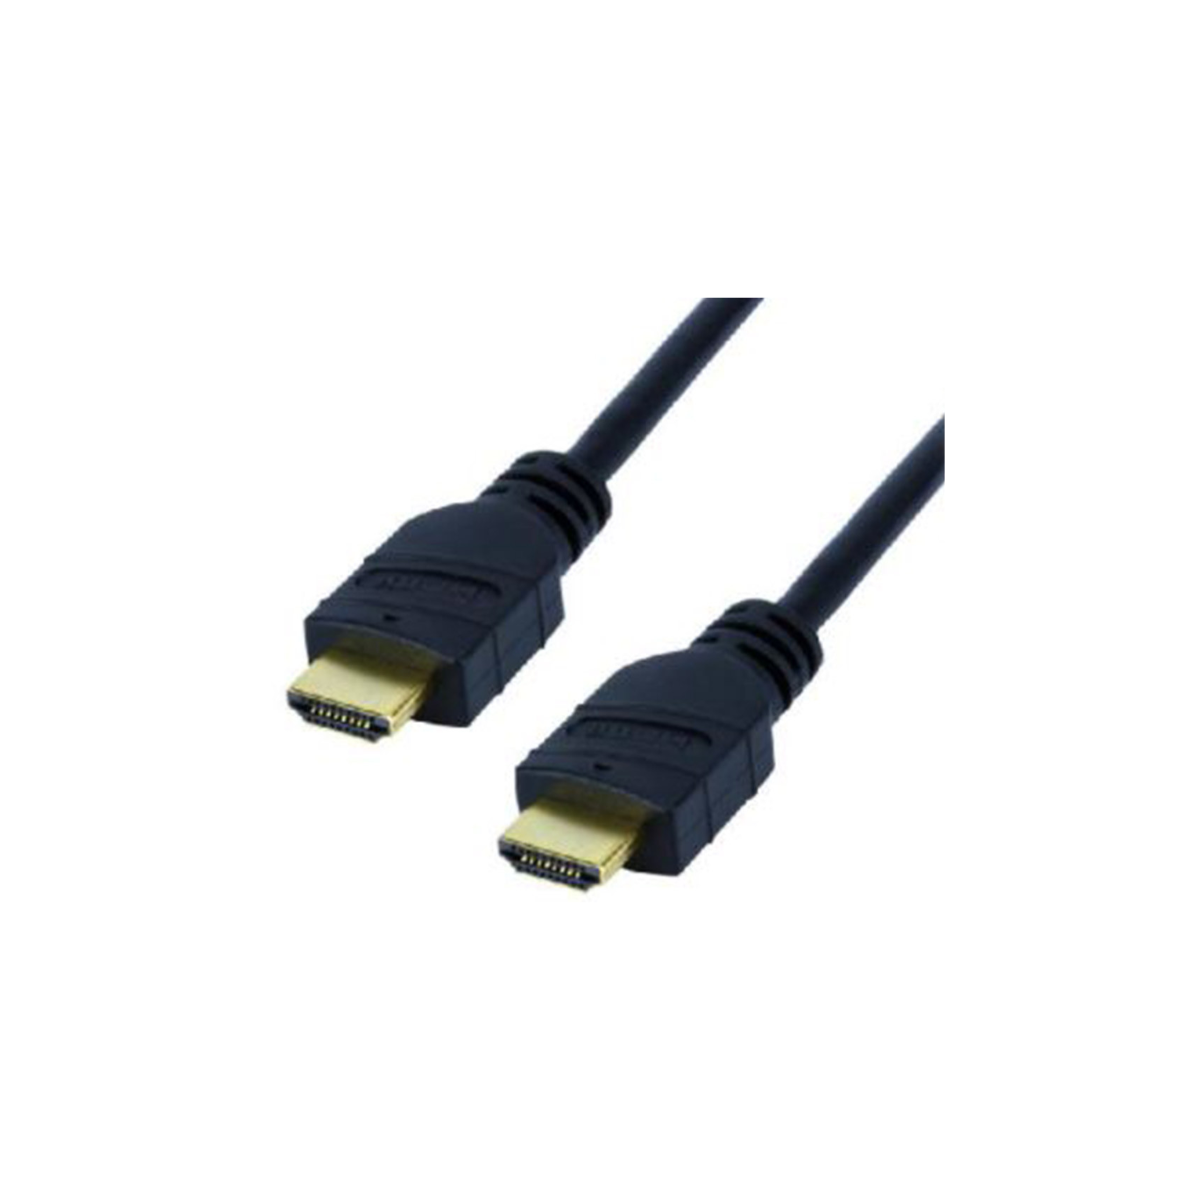 https://www.videoplusfrance.com/354718-product_full/mcl-cable-hdmi-4k-male-male-25m.jpg